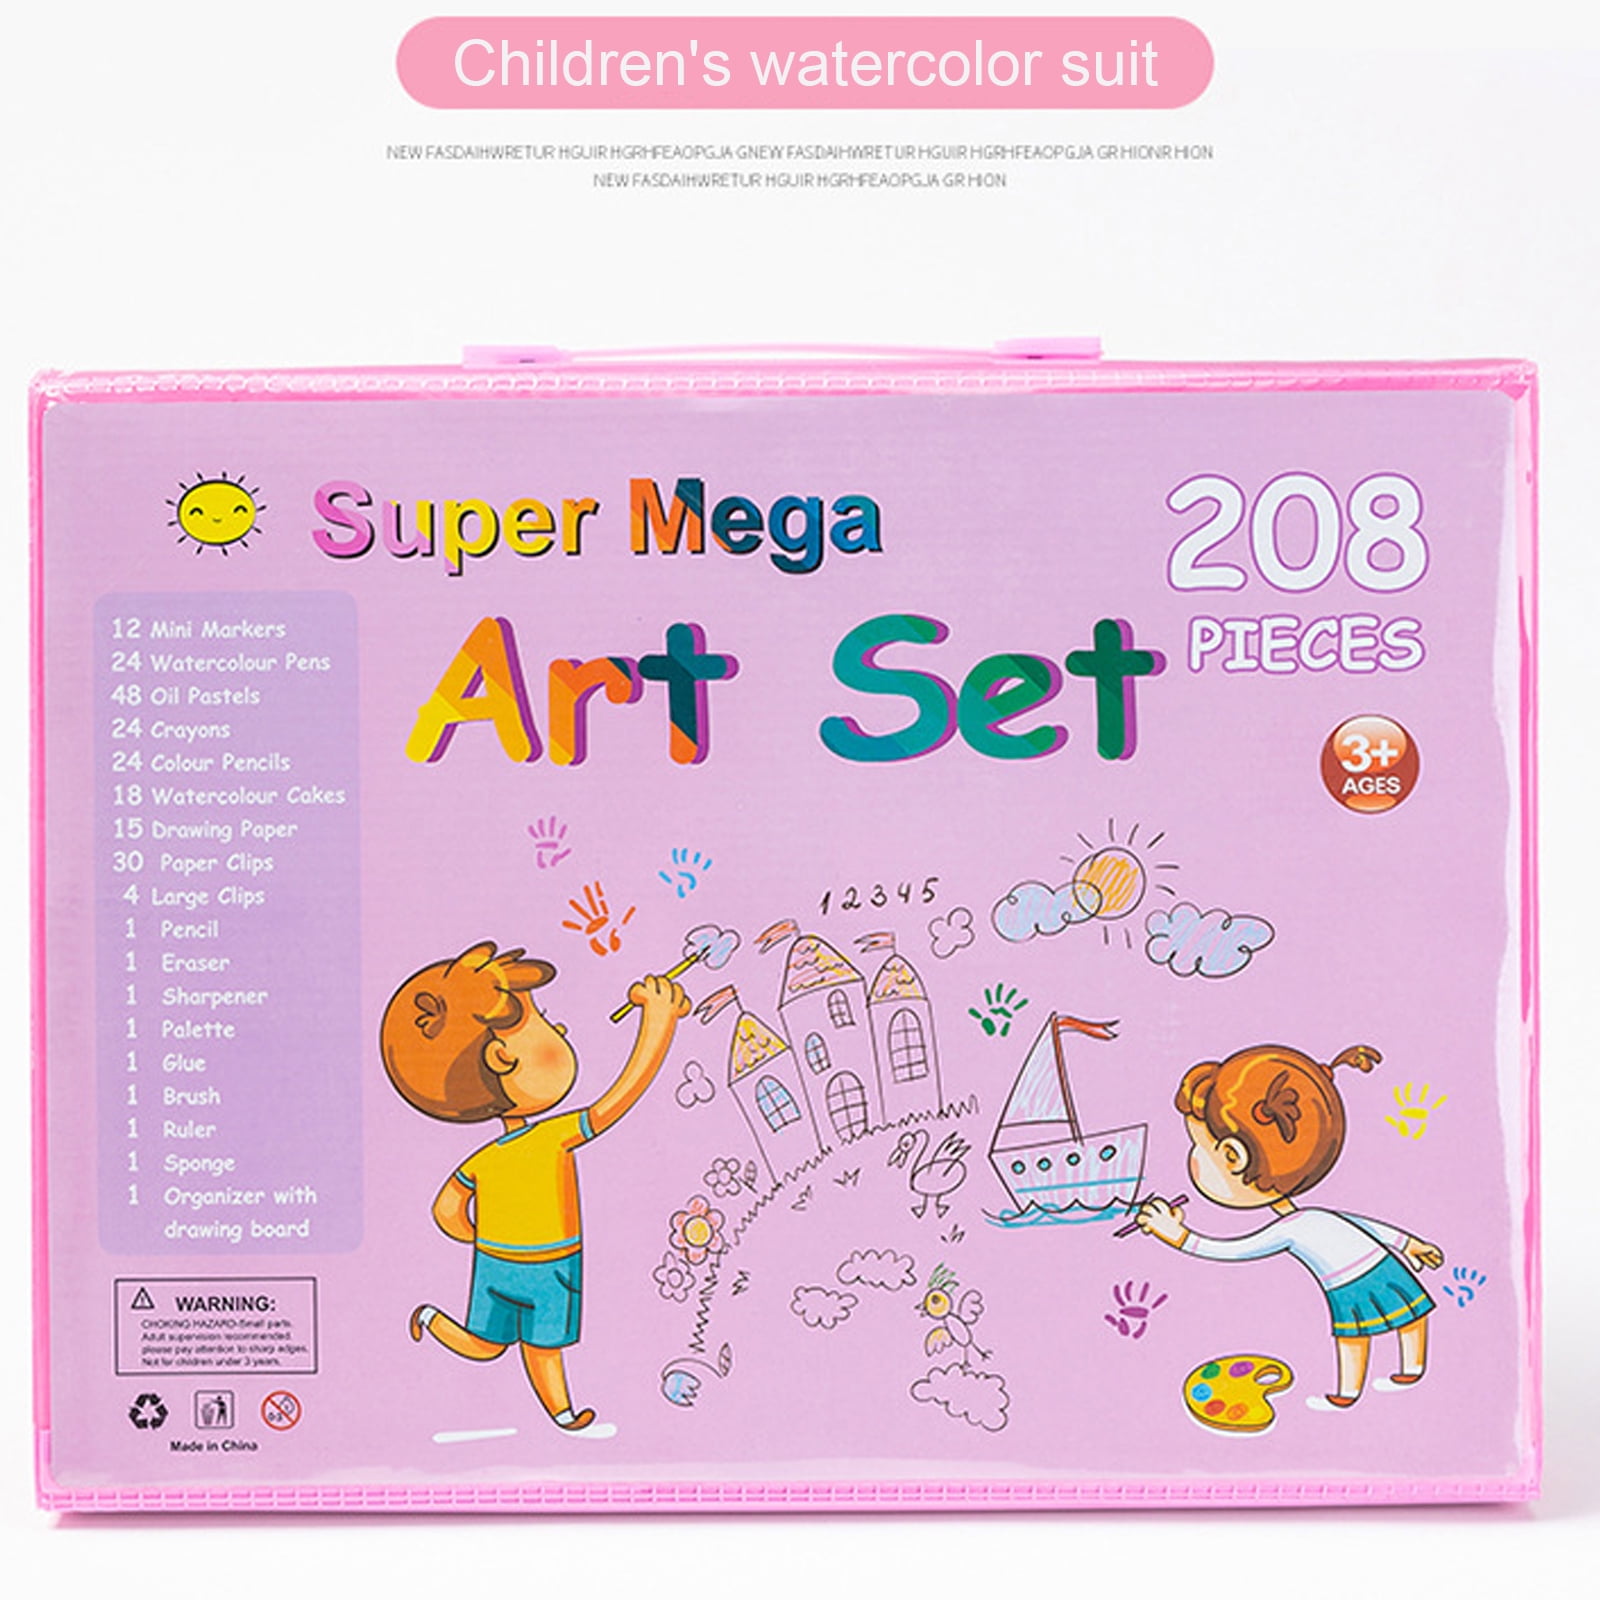 Art Supplies, 283 Pieces Drawing Set Art Kits with Trifold Easel